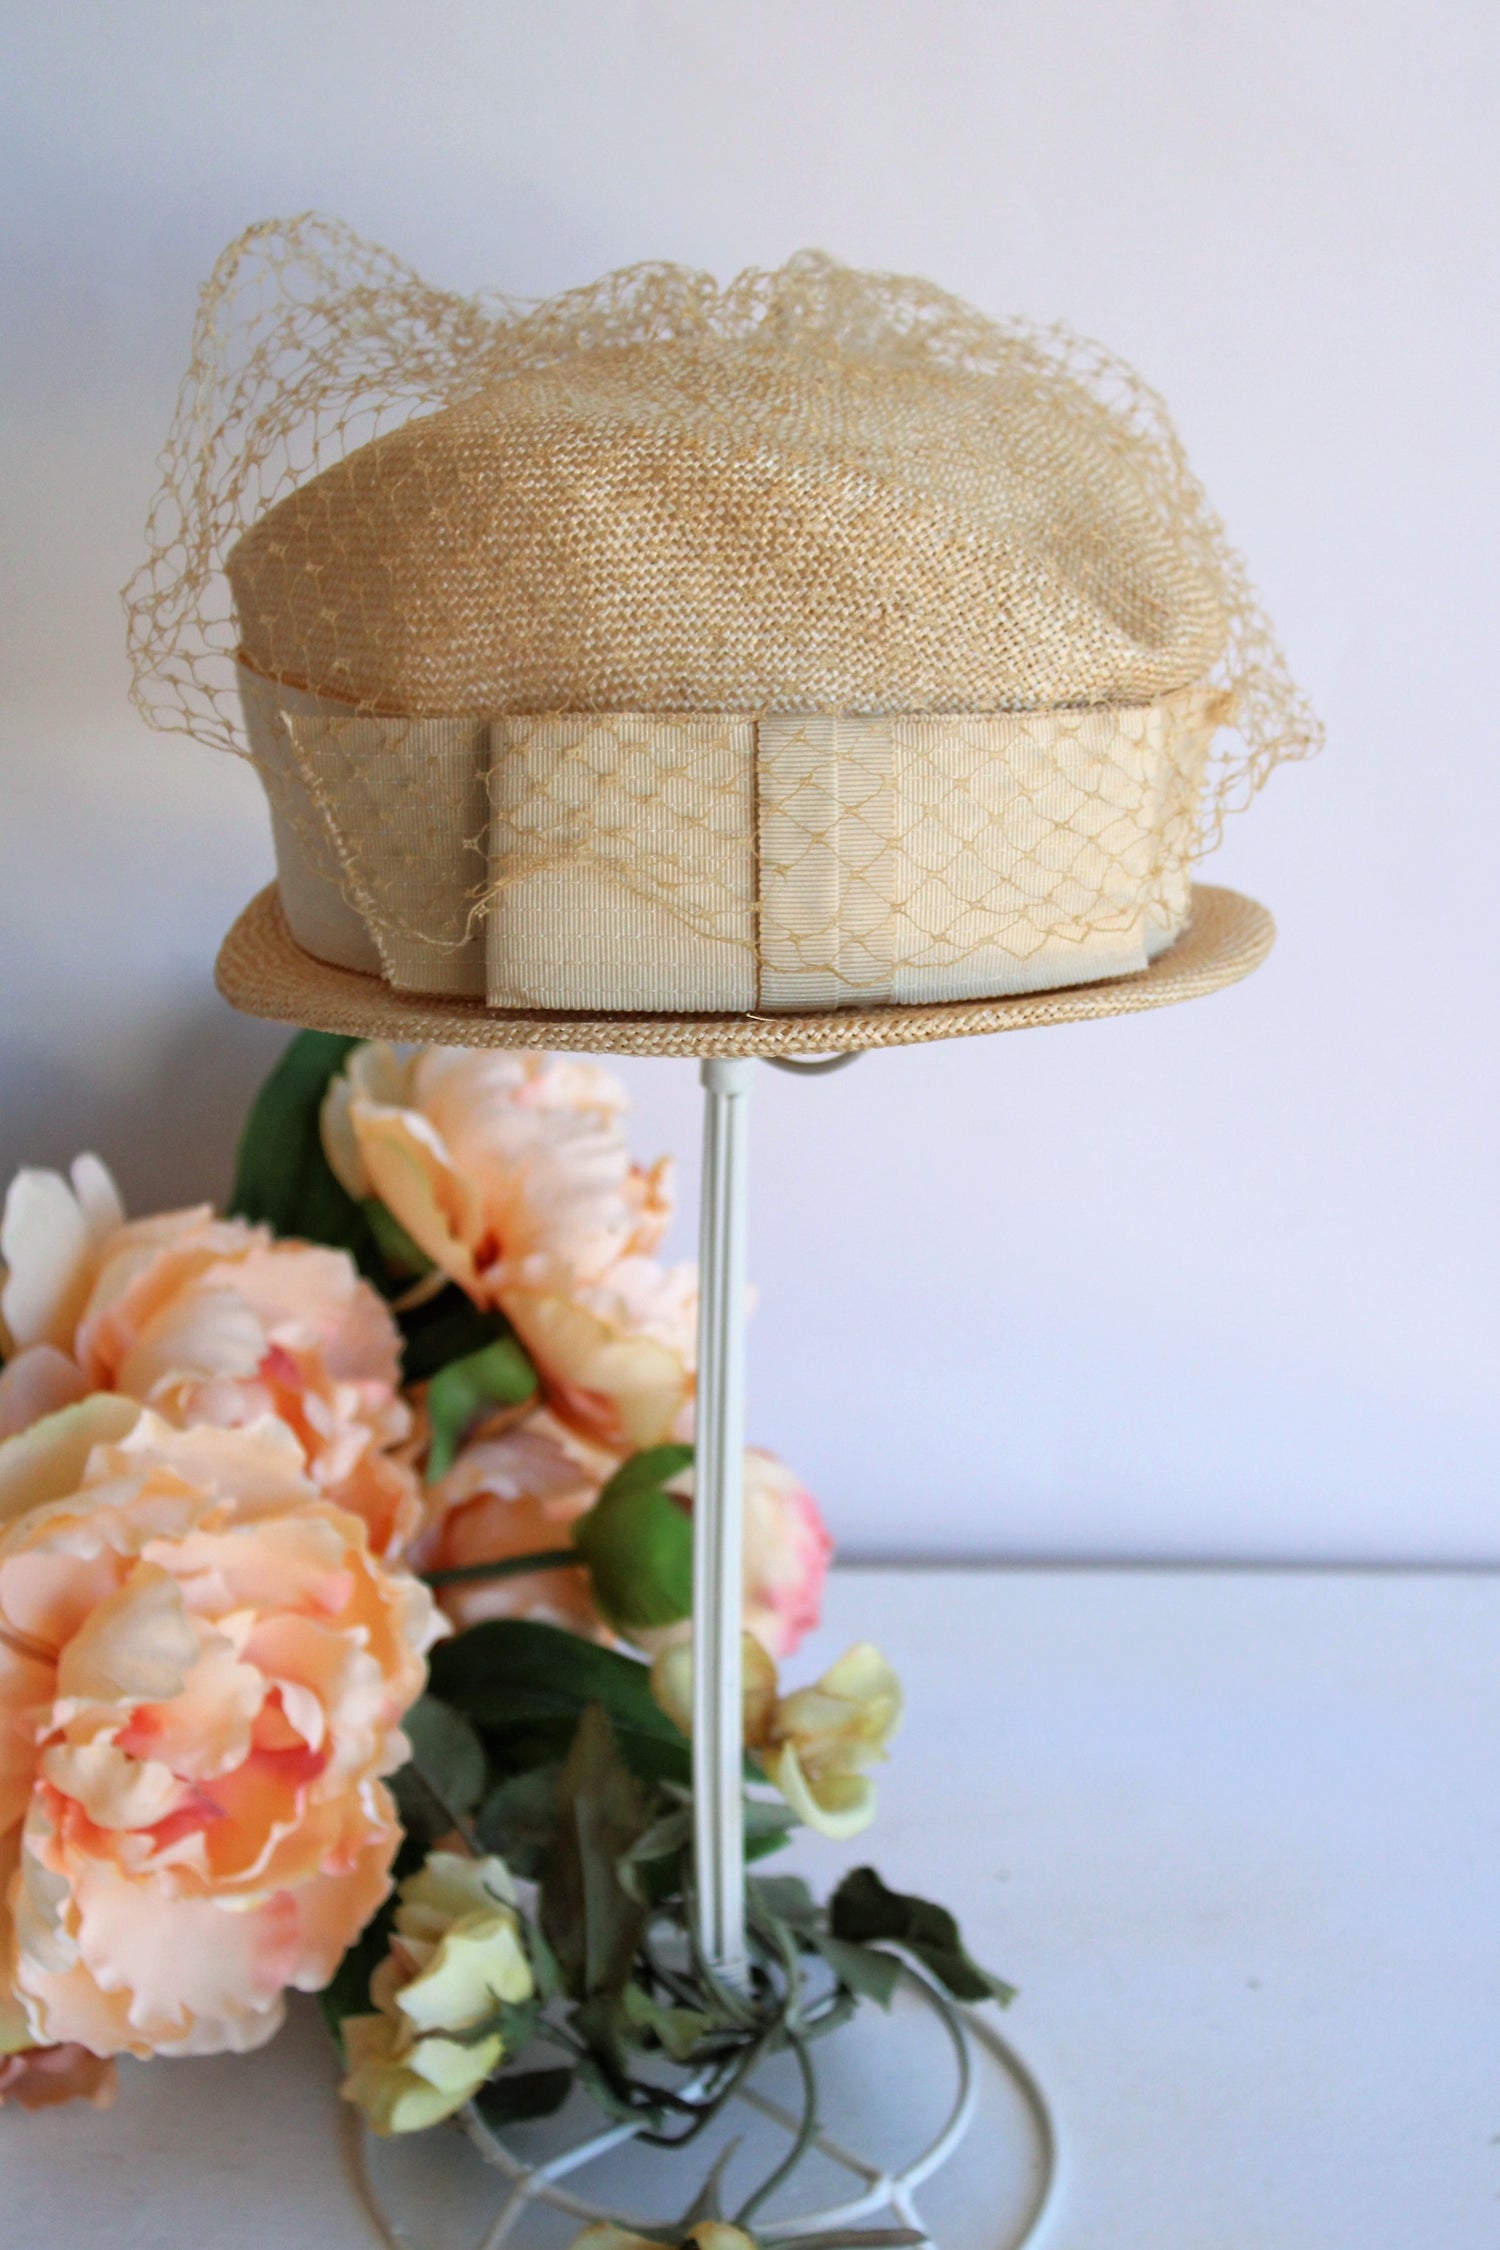 Vintage 1950s Straw Cloche Hat with Veil and Bow